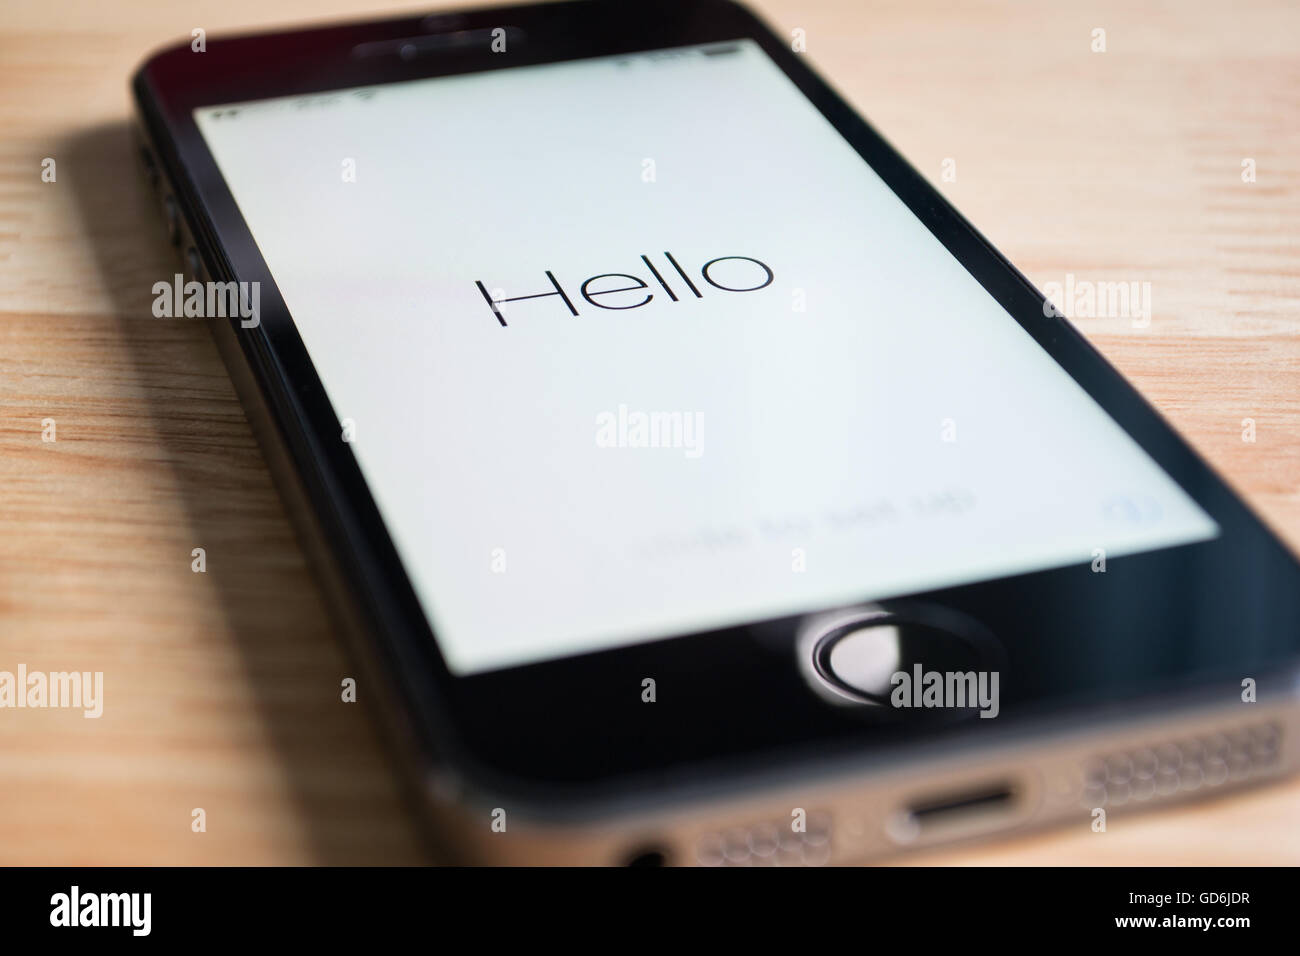 Bangkok, Thailand - March 23, 2016 : Apple iPhone5s showing its screen 'Hello', when the software has been updated. Stock Photo